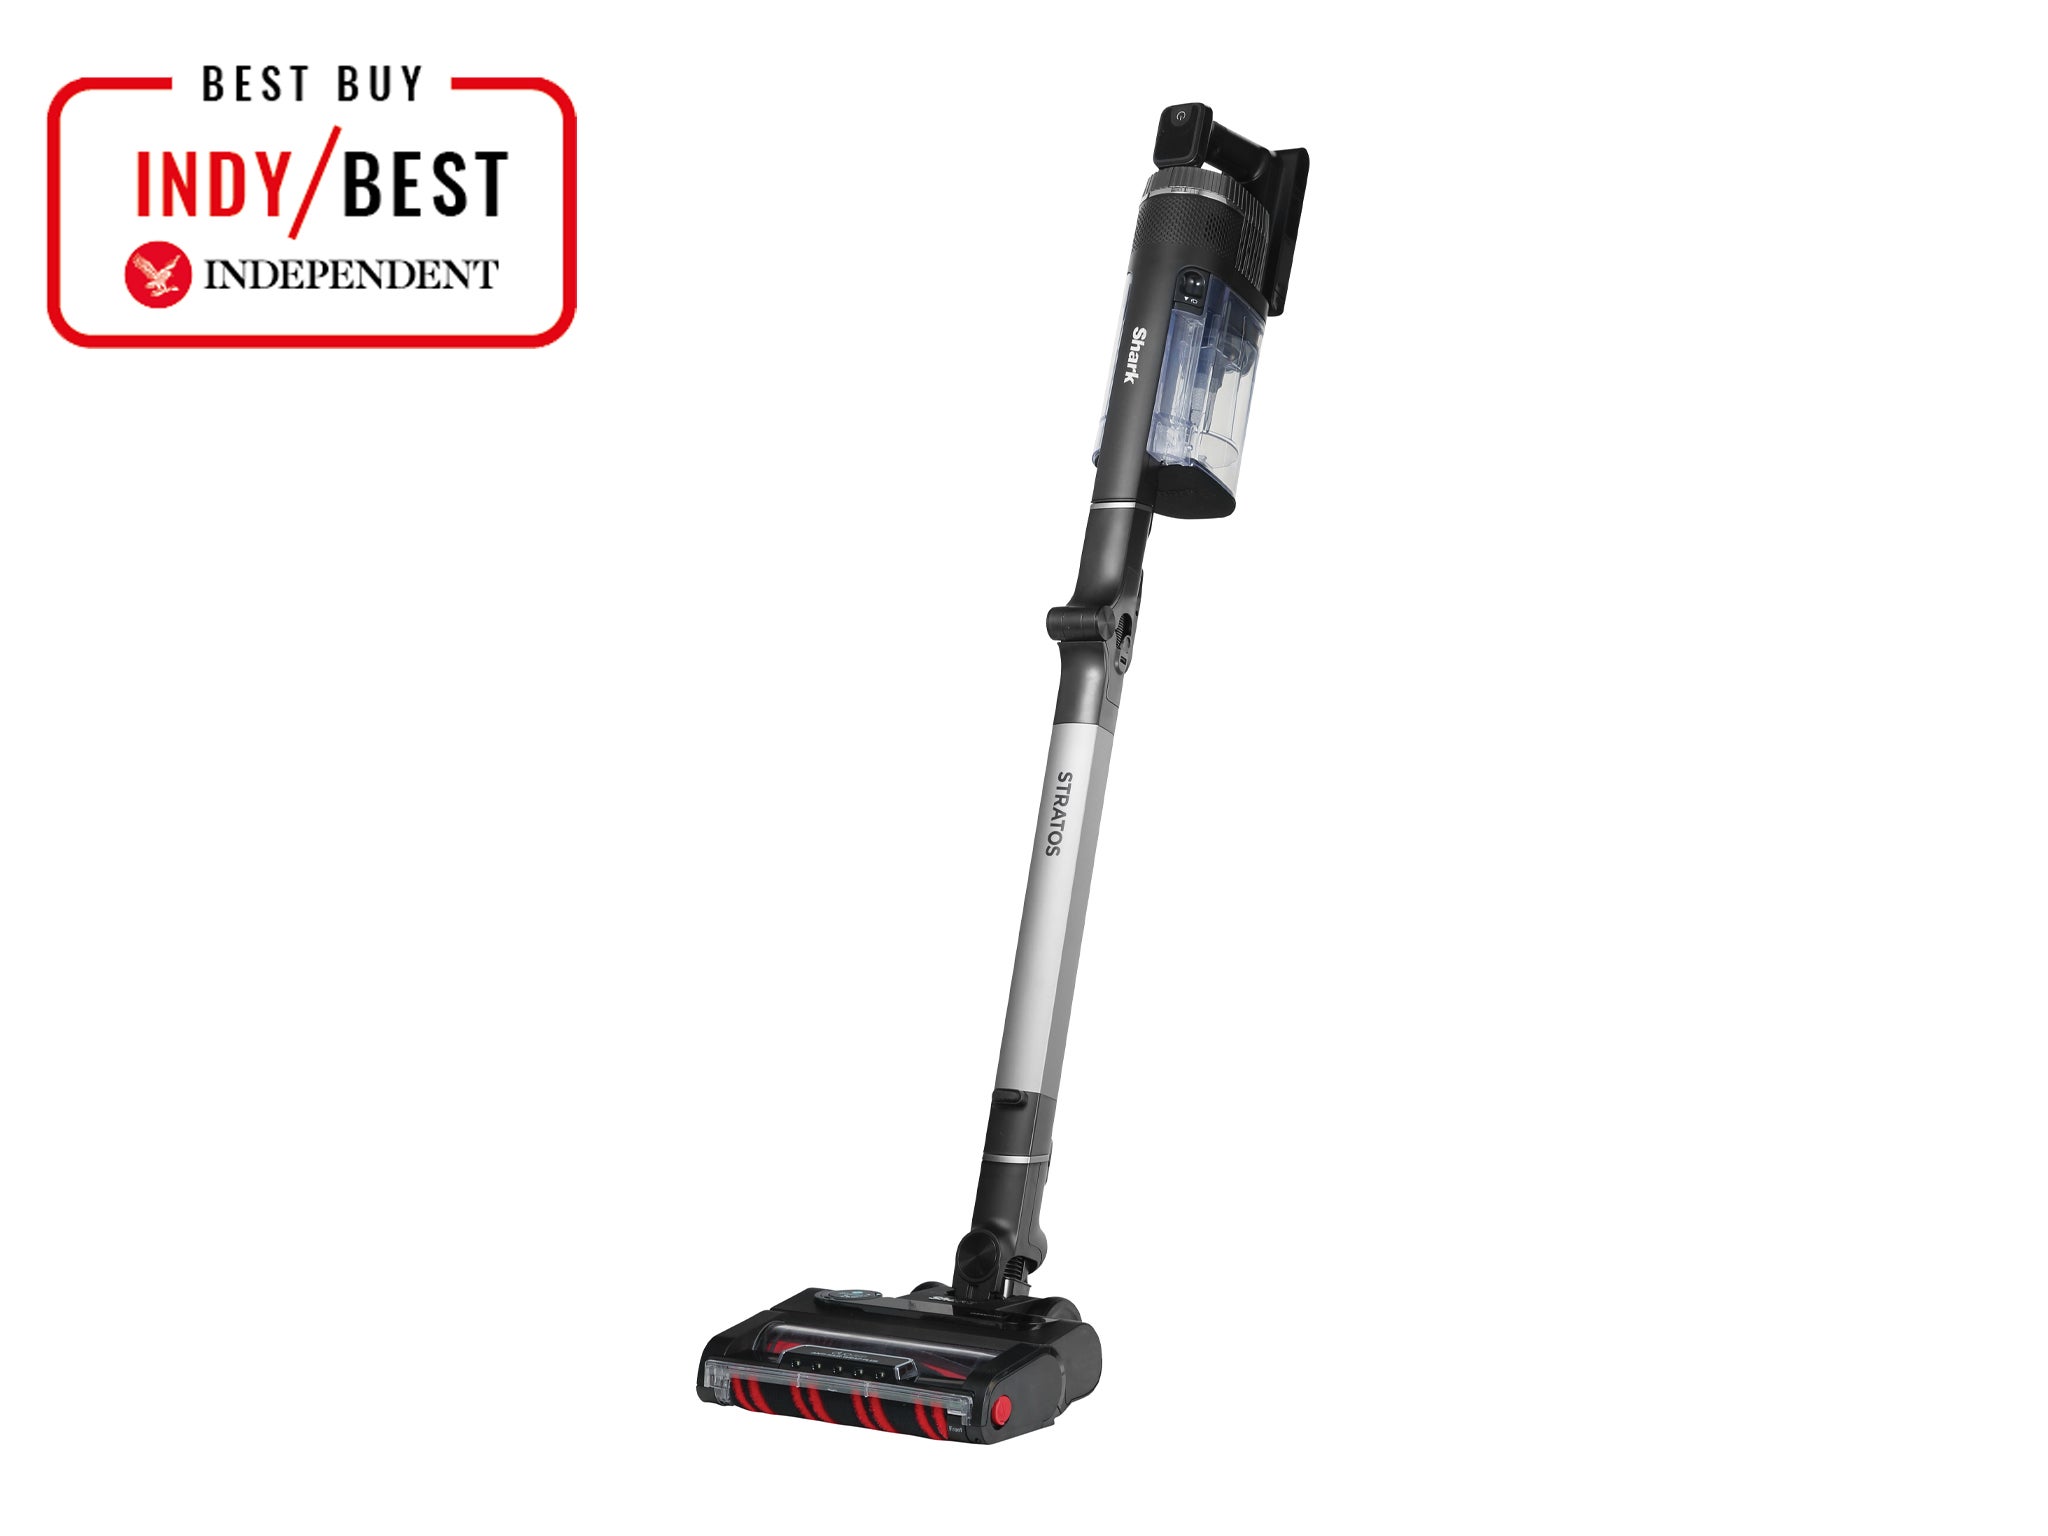 indybest, shark, deals, amazon, black friday, shark’s cyber monday sale is here – these are the best deals to shop on the flexstyle, vacuums and more